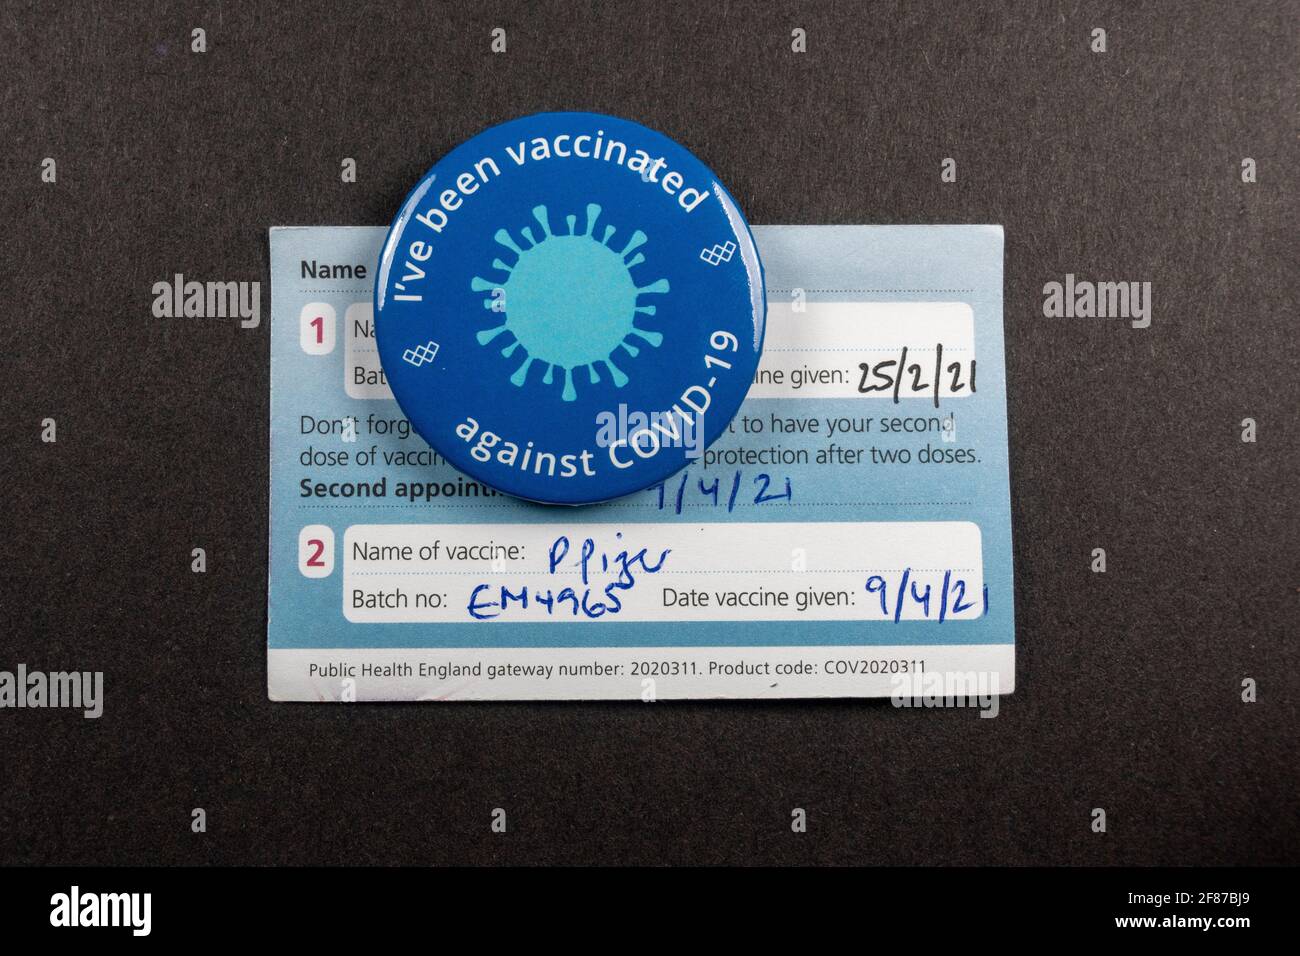 'I've been vaccinated against COVID-19' badge on a completed vaccination card during the Coronavirus pandemic (2021). Stock Photo